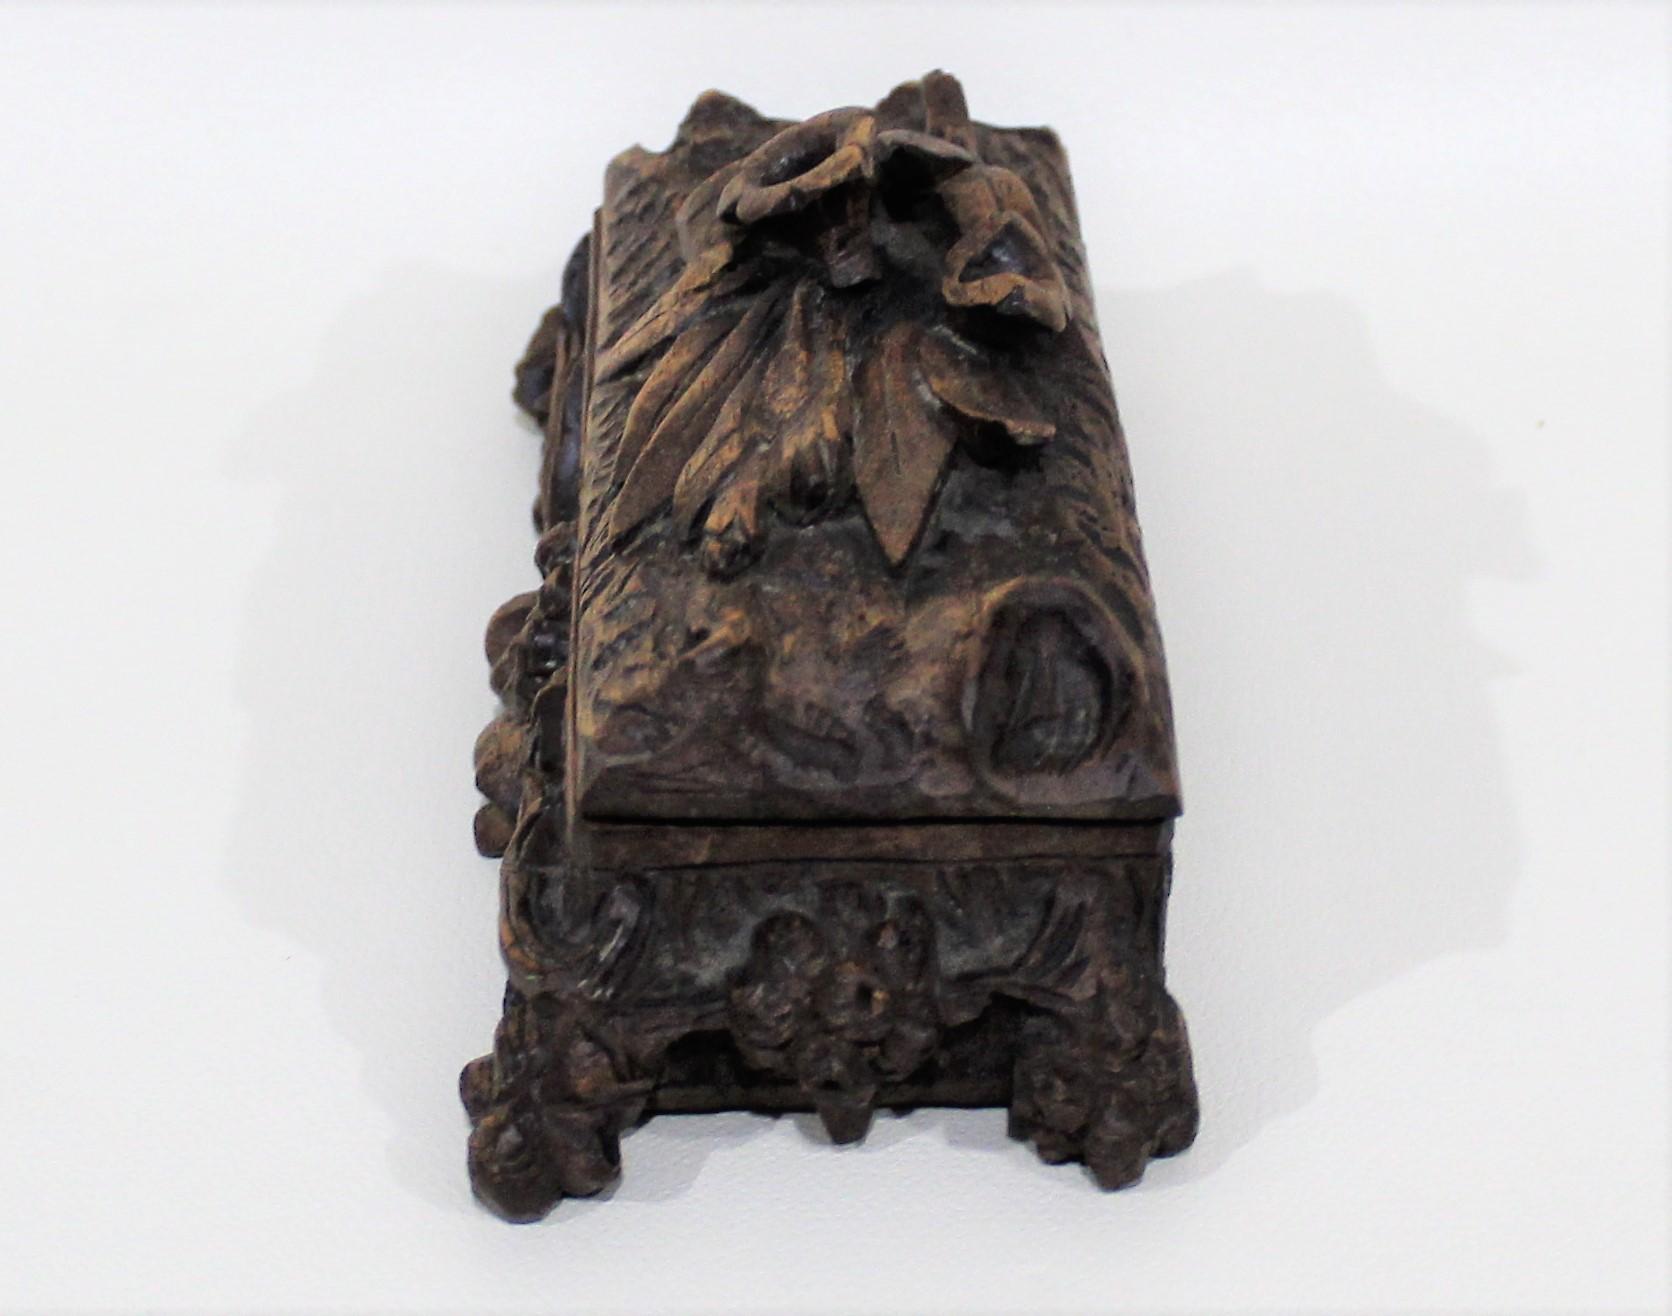 19th century Black Forest wood box with floral and foliate designs throughout.